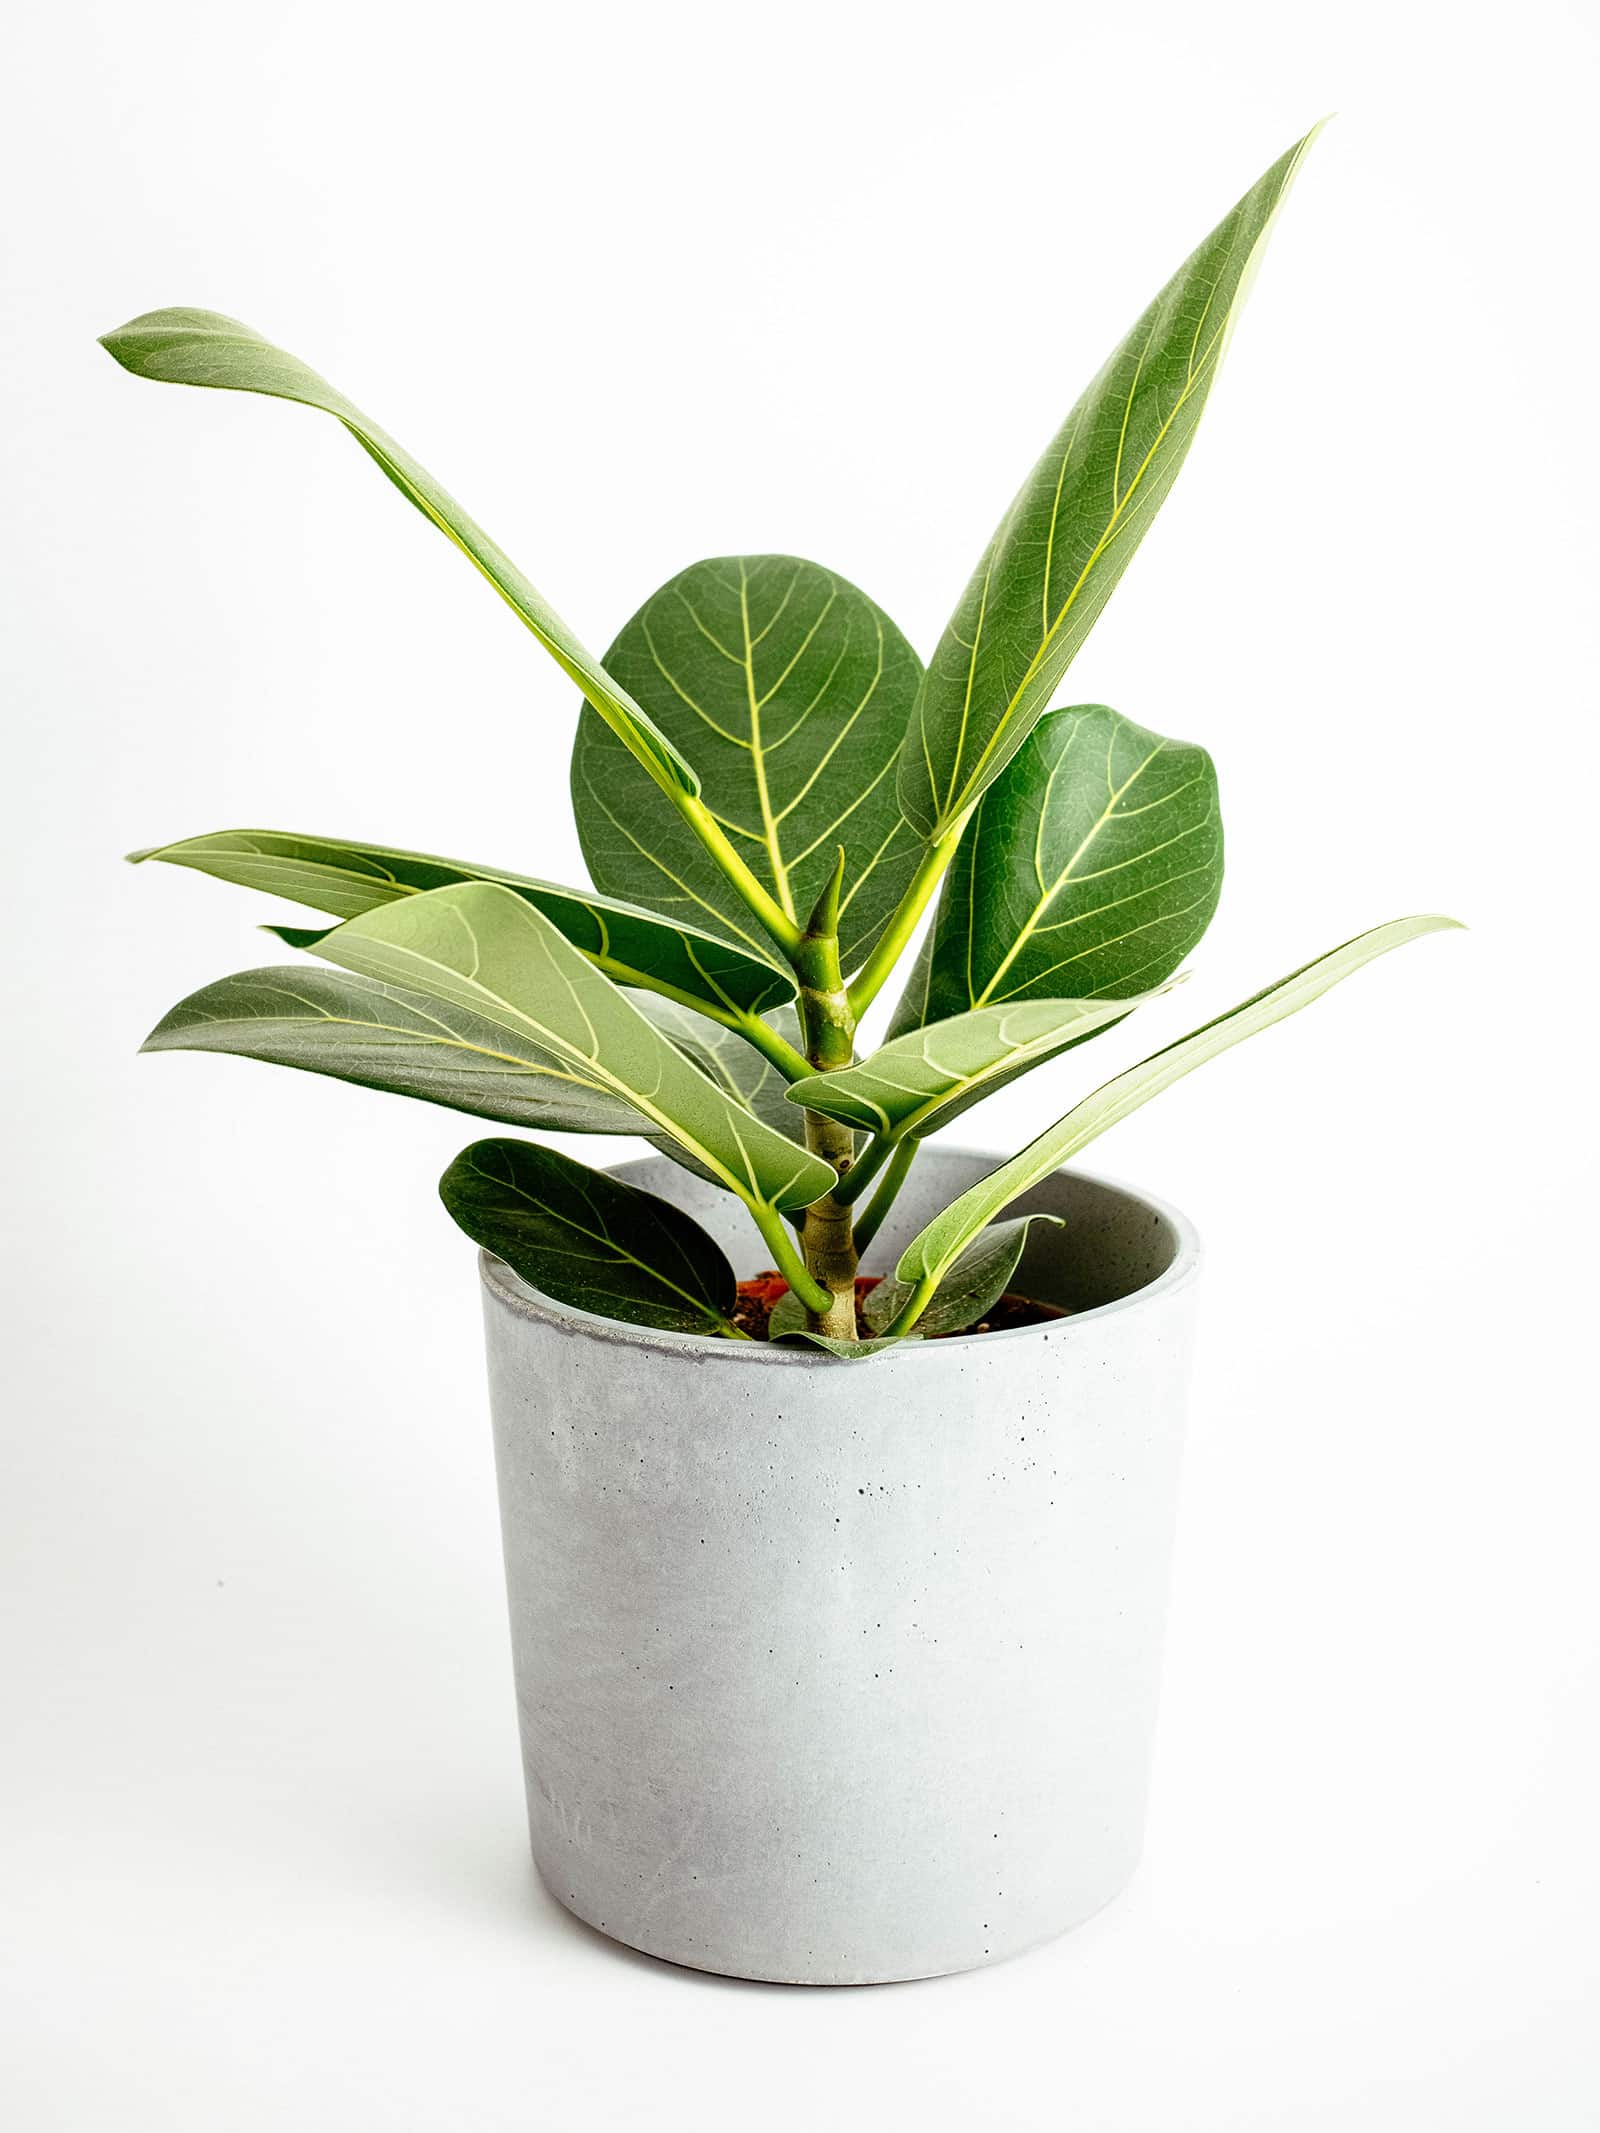 A small Ficus altissima houseplant in a cement pot, shot against a white background